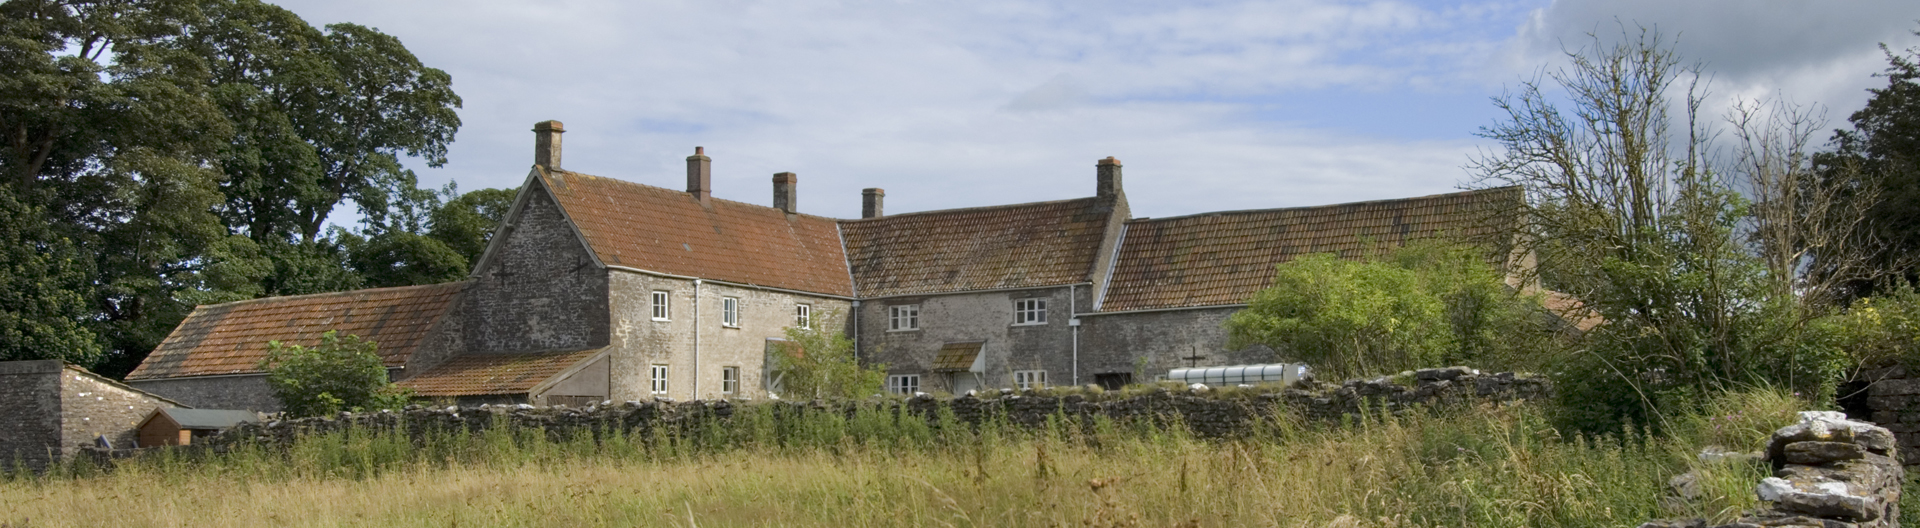 L-shaped stone farmstead in rural setting in Priddy, Somerset